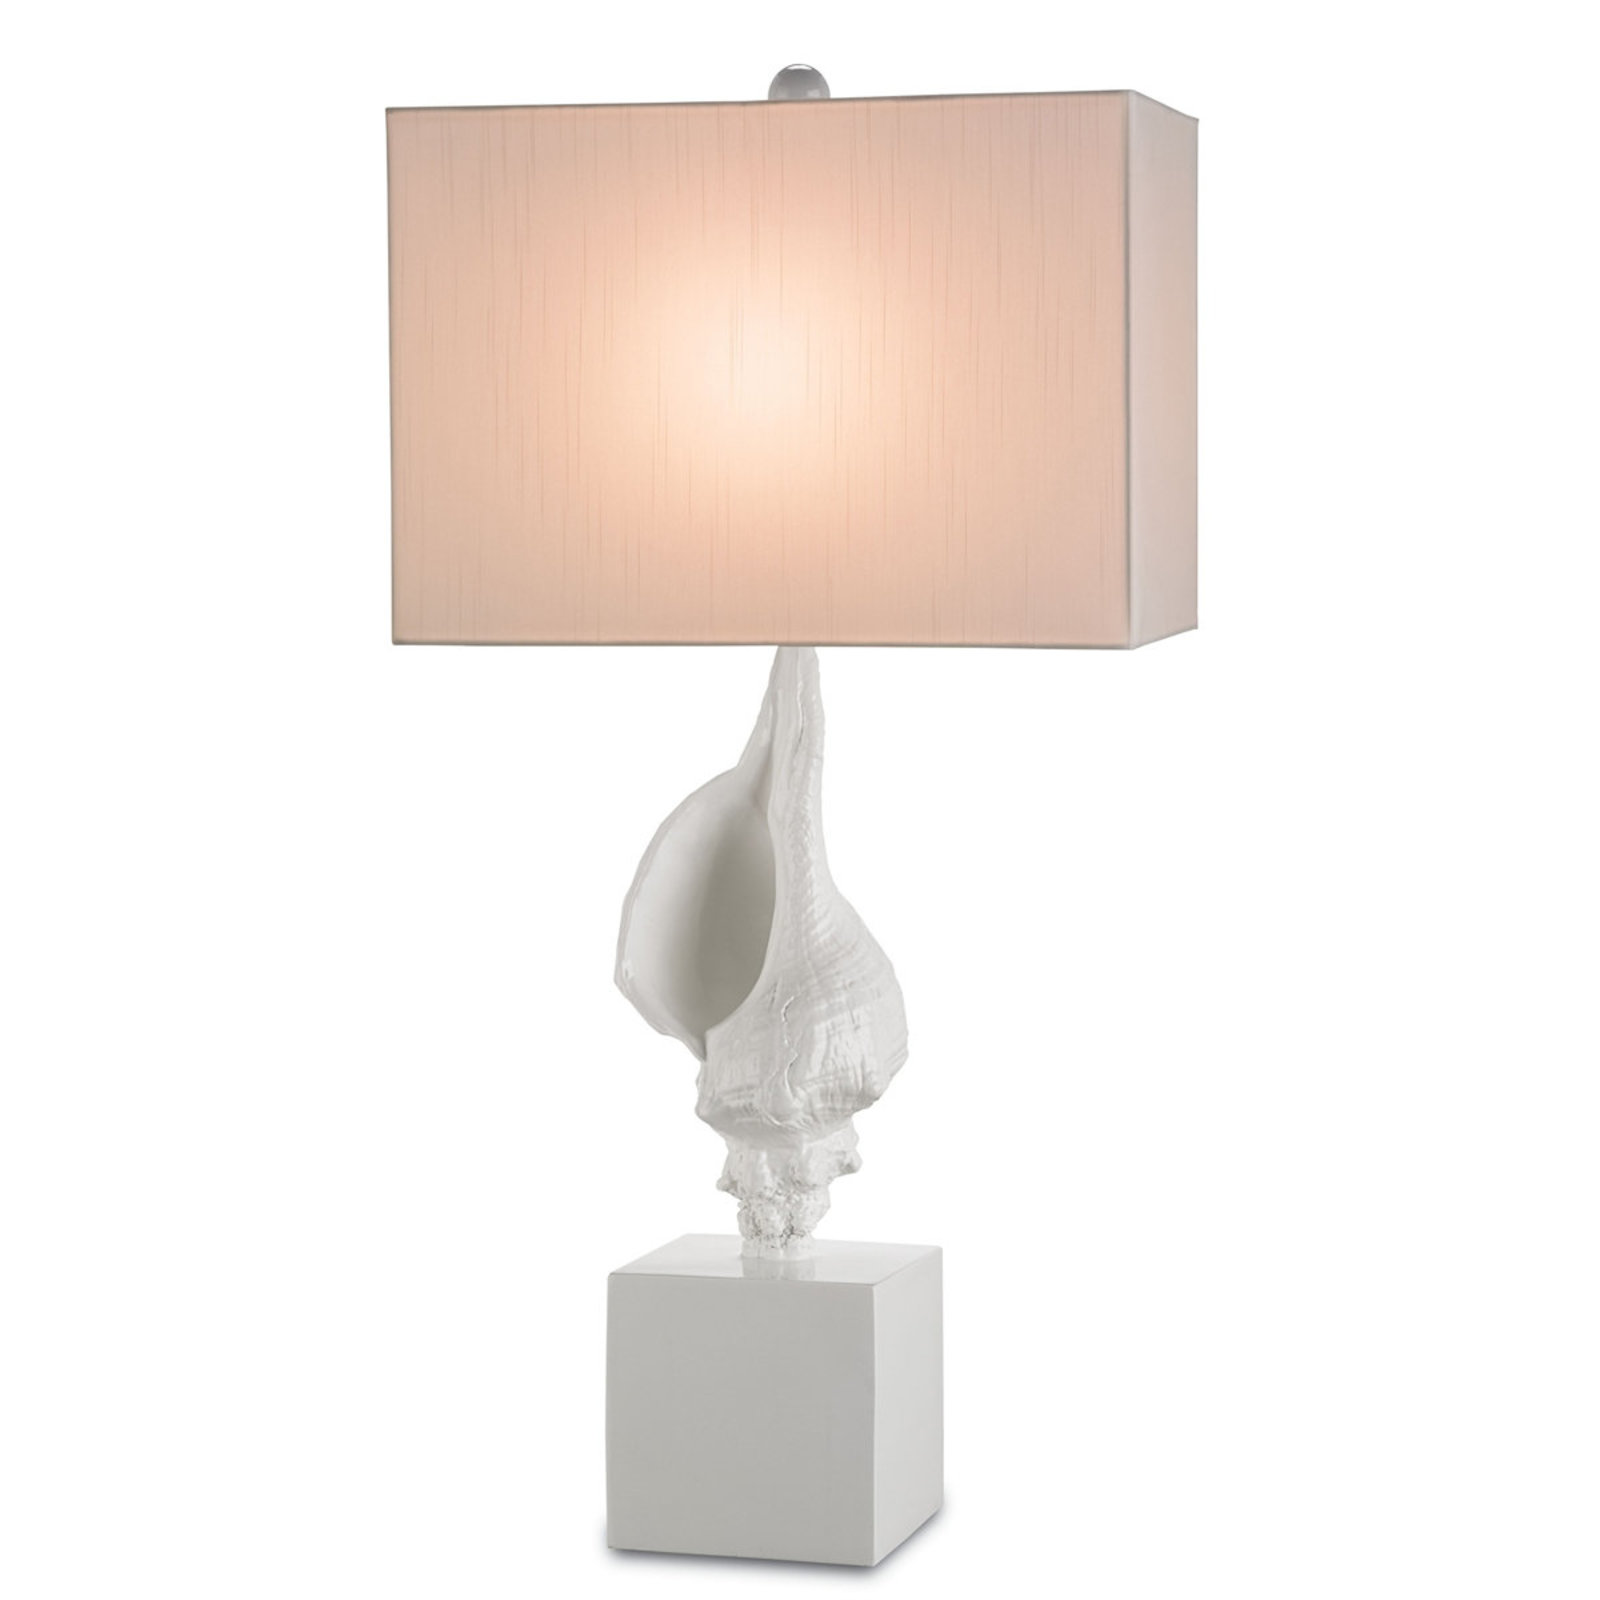 table lamps nautical coastal beach inspired shades light conch and cube lamp accent marble tulip side restoration hardware sectional ikea console patio wine stoppers target crate